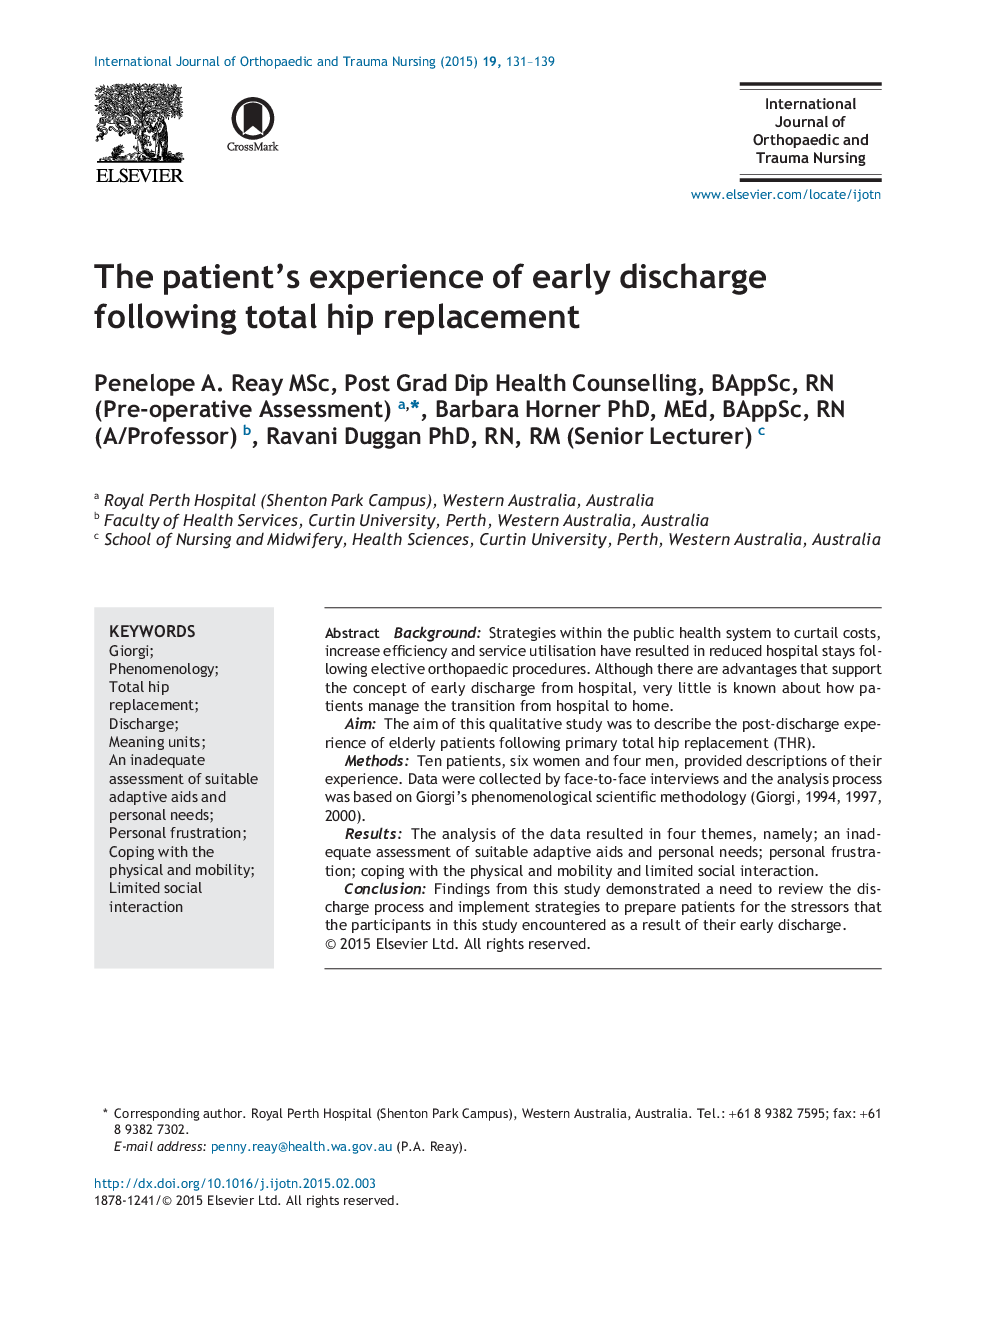 The patient's experience of early discharge following total hip replacement